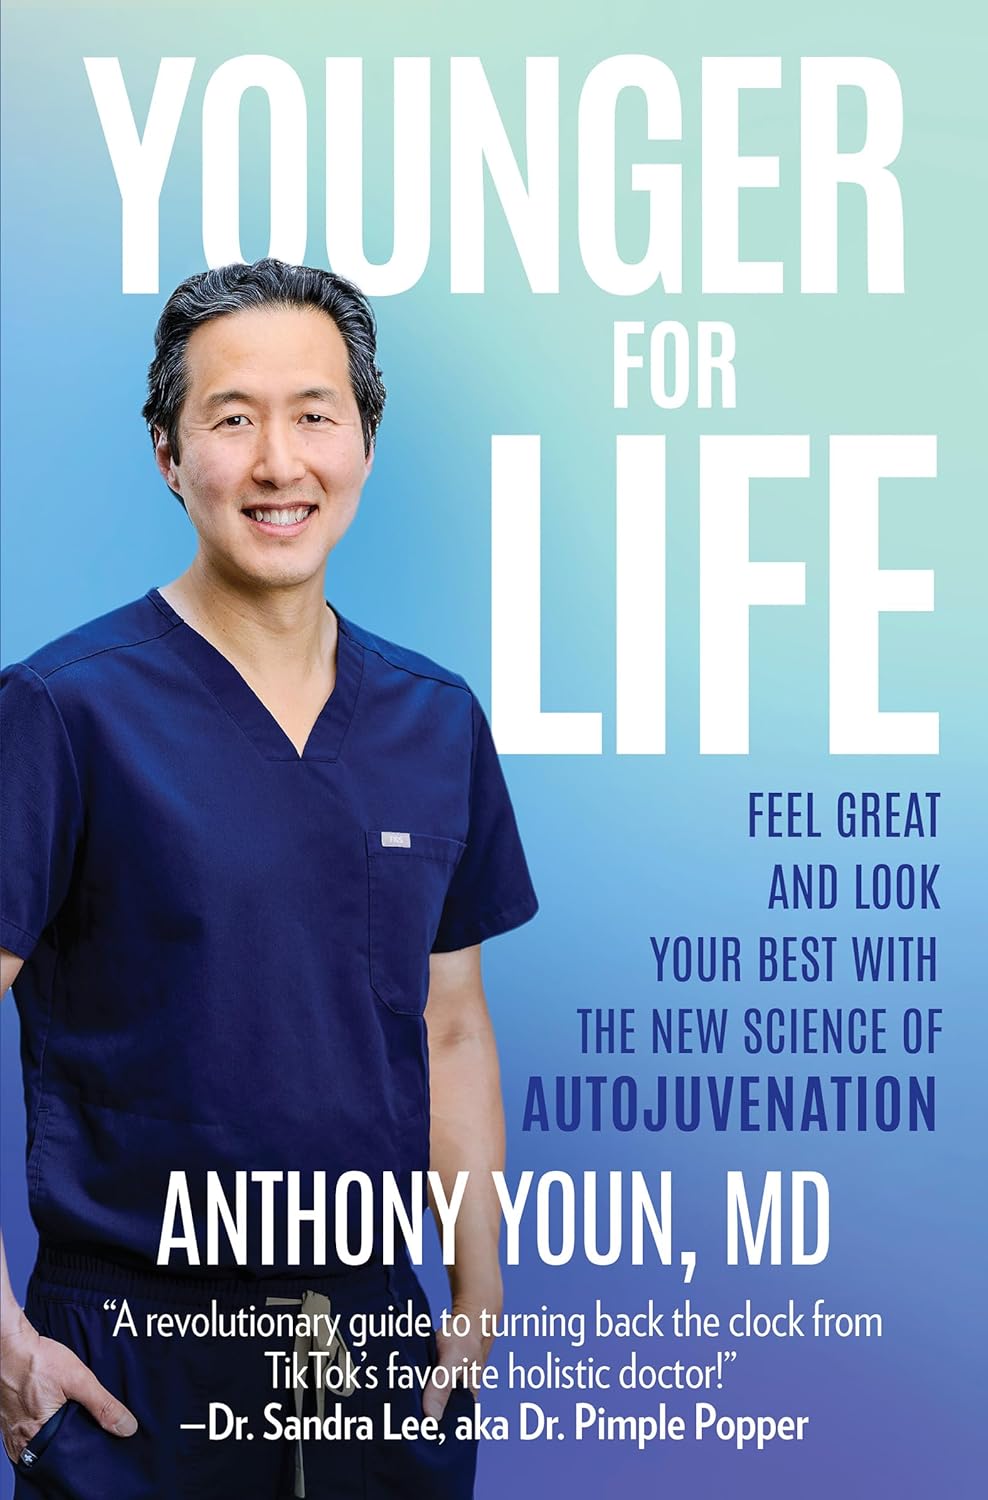 Younger for Life: Feel Great and Look Your Best with the New Science of Autojuvenation